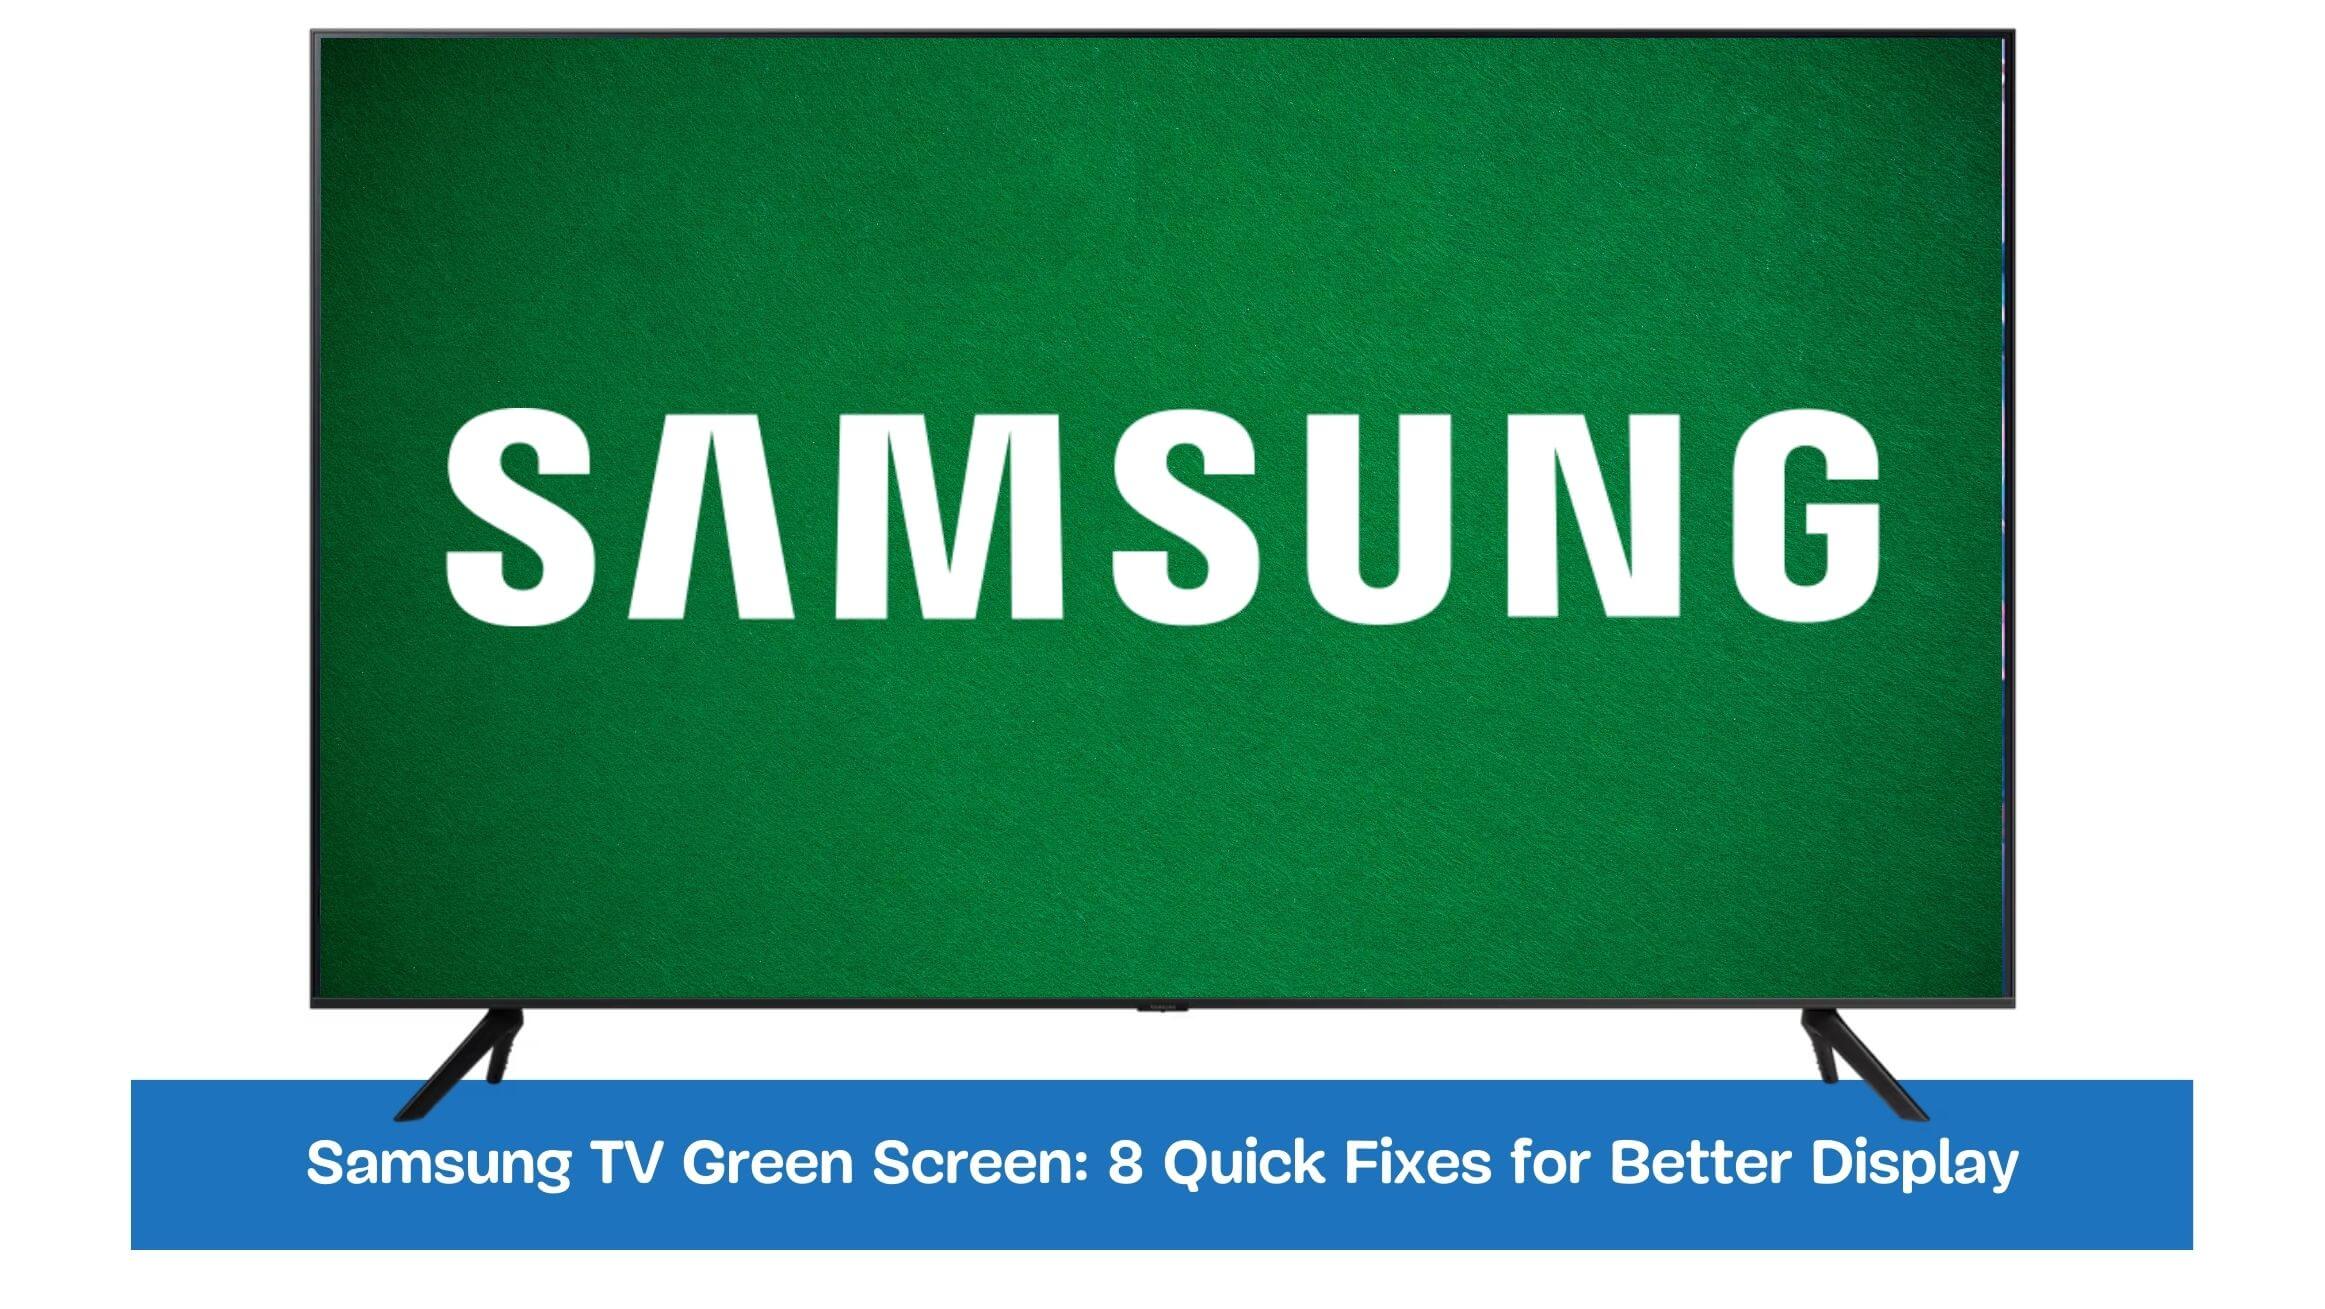 Samsung TV Green Screen: 8 Quick Fixes for Better Display